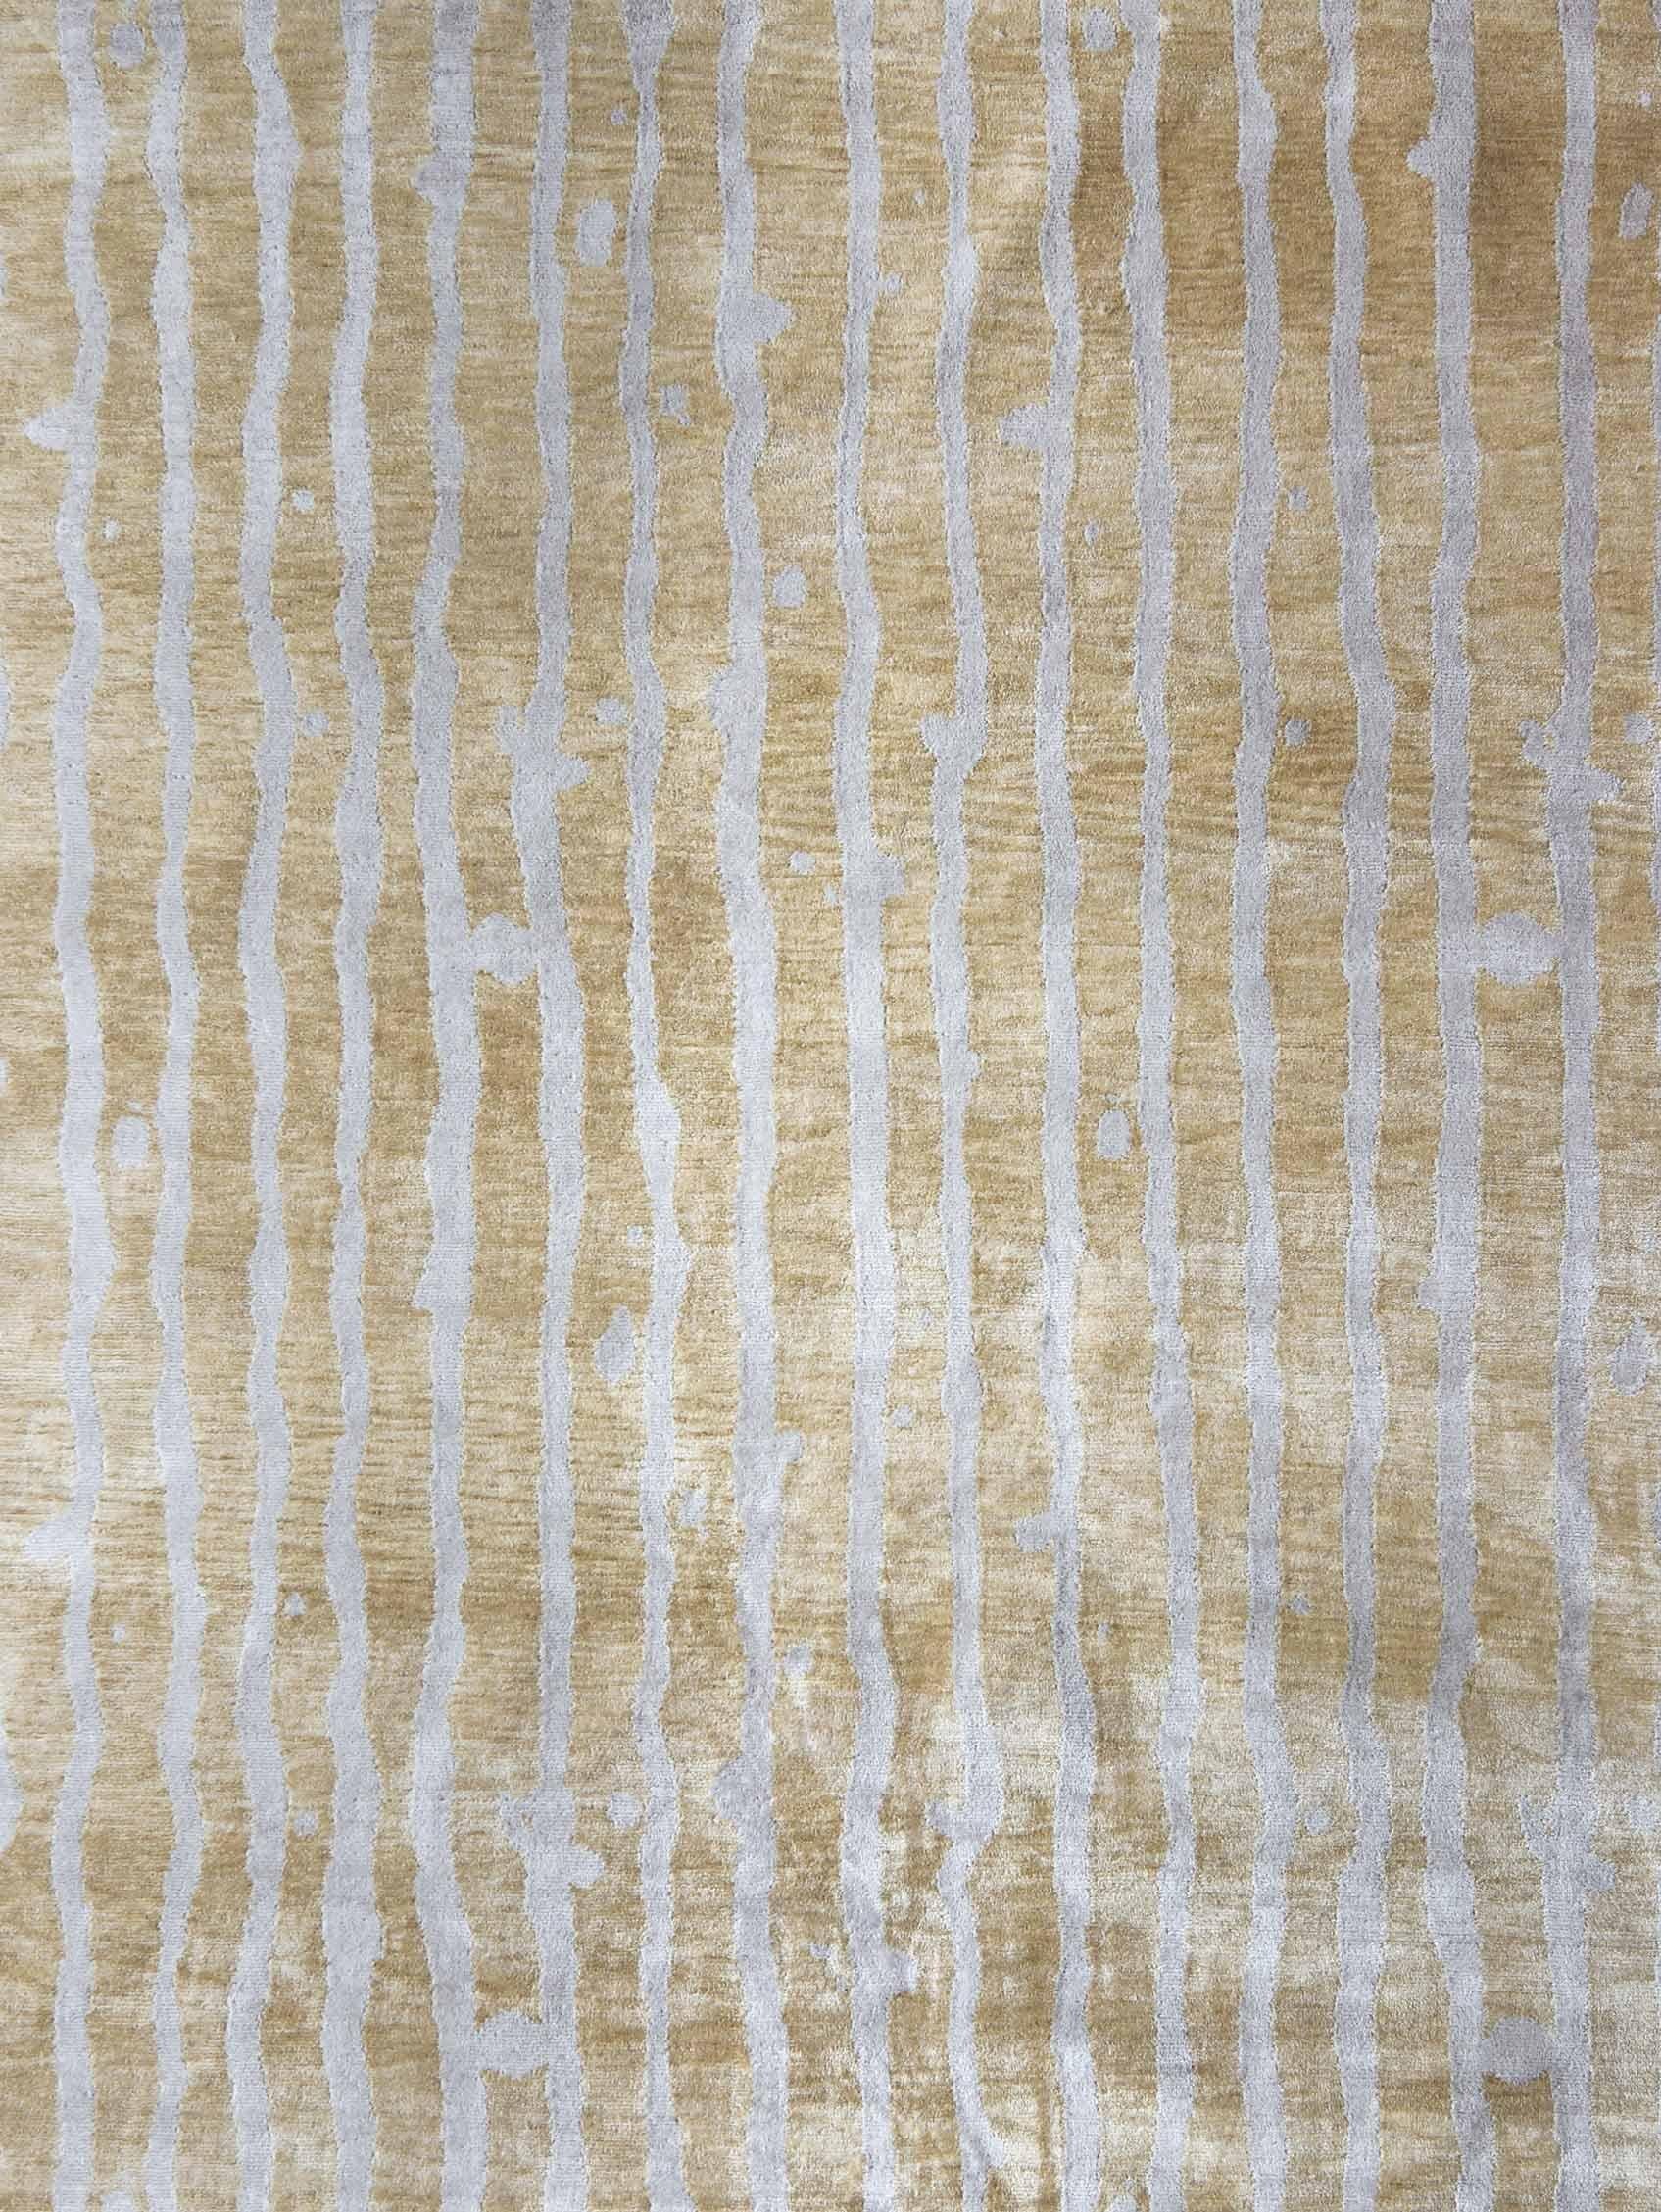 Drippy Stripe Sage hand knotted Rug by Eskayel
Dimensions: D 5' x H 8'
Pile Height: 6 mm
Materials: 100% Merino wool.

Eskayel hand knotted rugs are woven to order and can be customized in various sizes, colors, materials, and weave